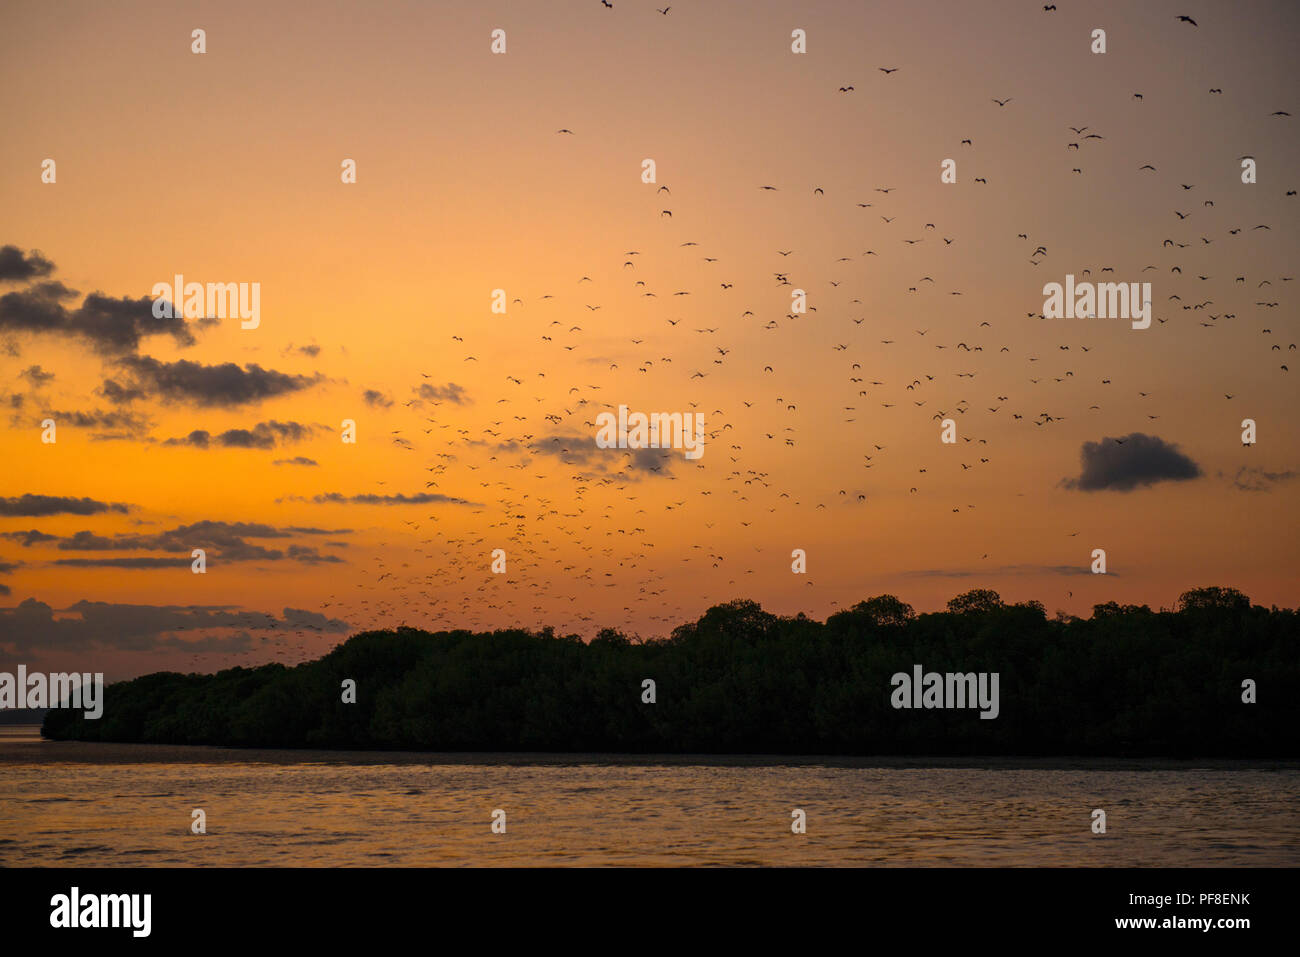 Silhouette of hundreds of fruit bats flying over a mangrove forest at dusk, in Komodo National Park, Indonesia Stock Photo